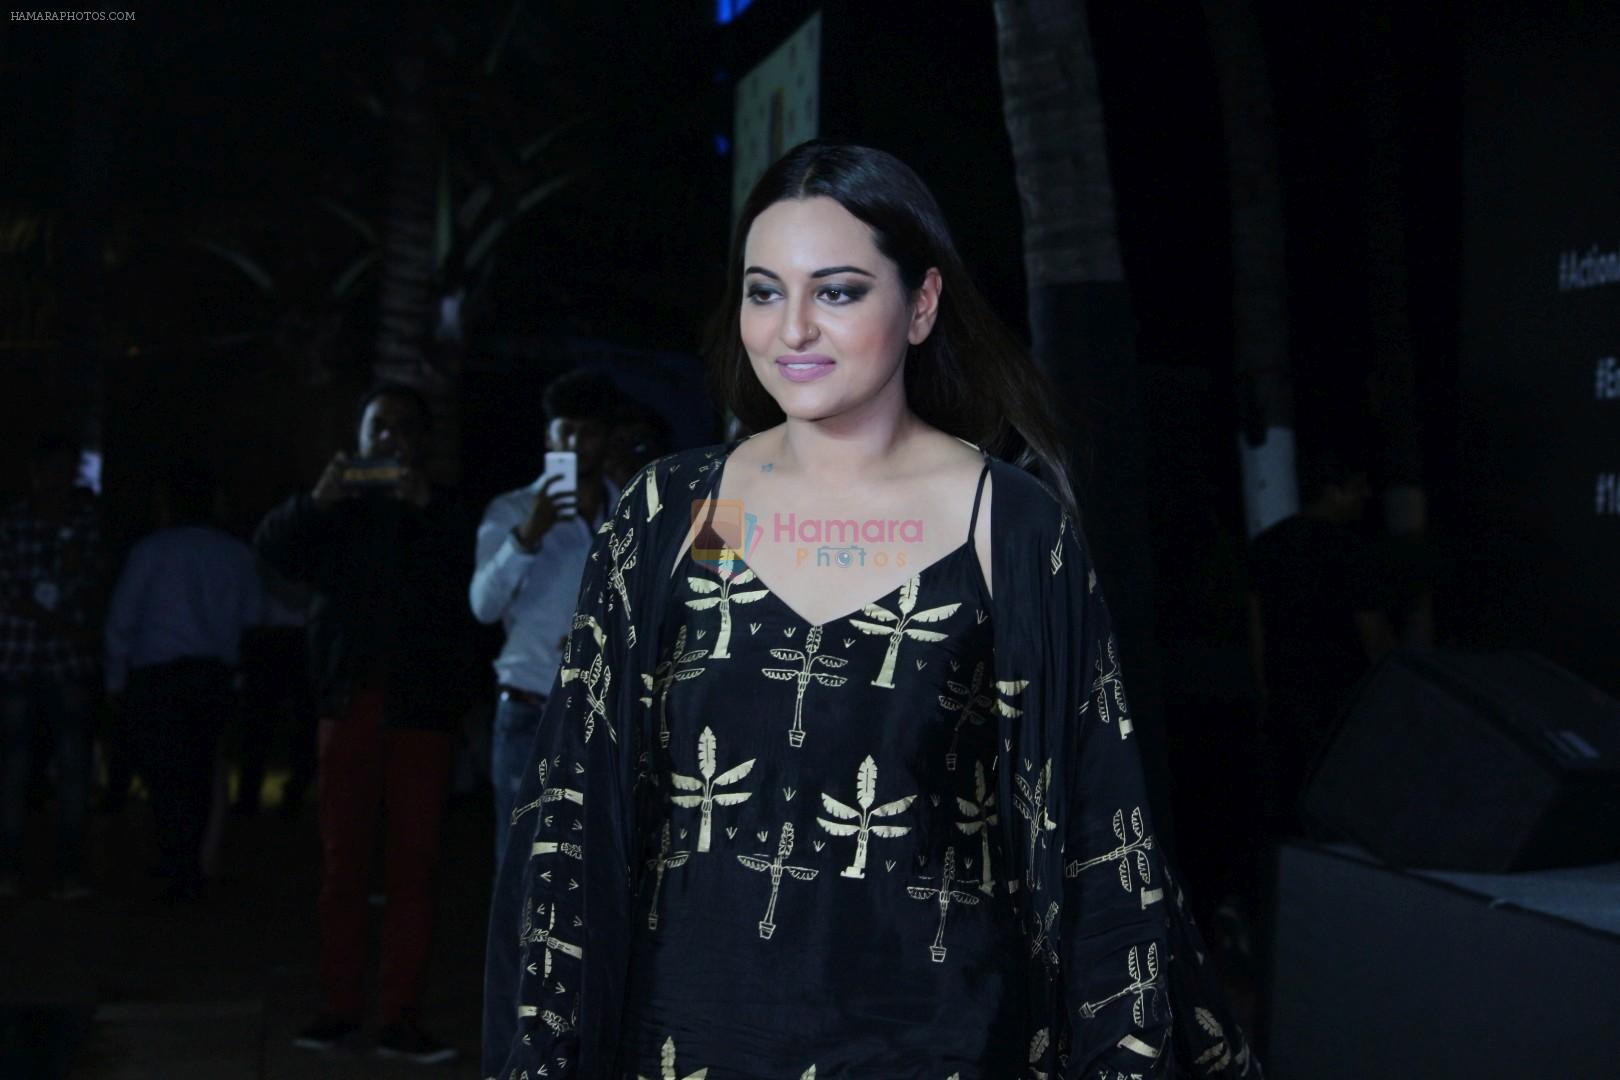 Sonakshi Sinha Attend The Awards Night For Its Short Film Festival Based On Women's Safety & Empowerment on 8th Dec 2017